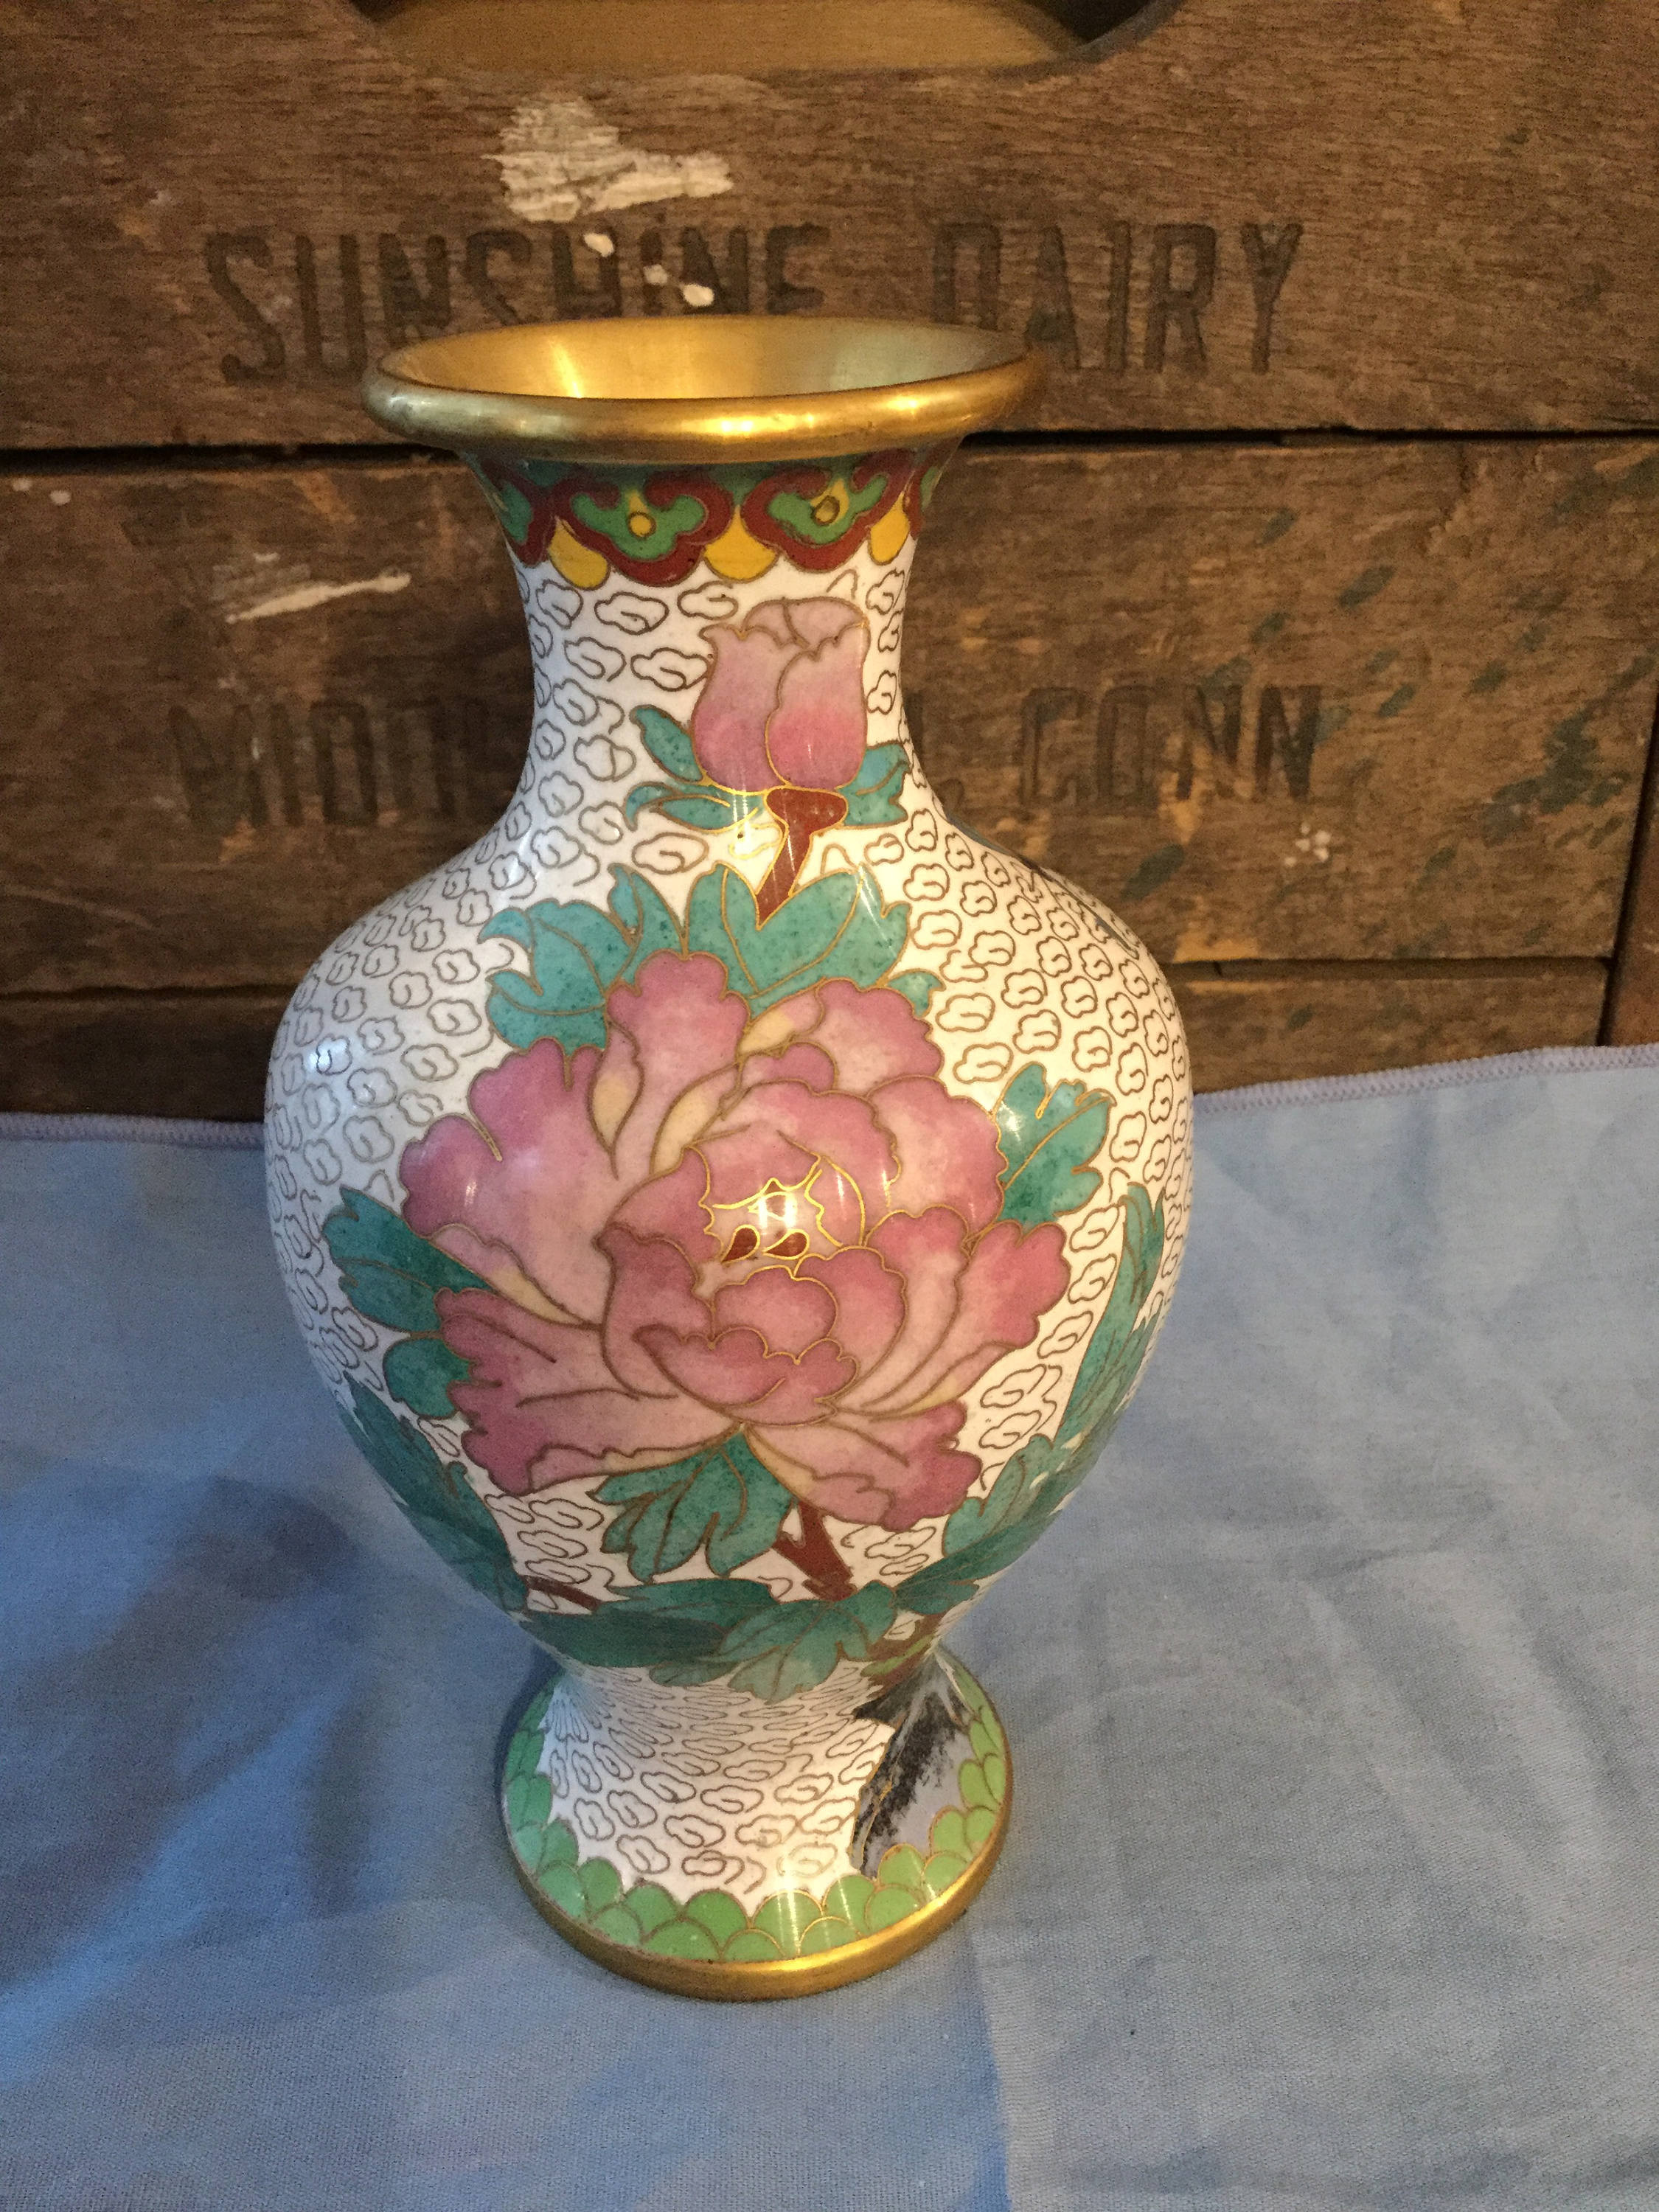 16 Perfect Antique Chinese Vases for Sale 2022 free download antique chinese vases for sale of antique chinese 1920s cloisonna vase in cream with etsy inside dc29fc294c28ezoom